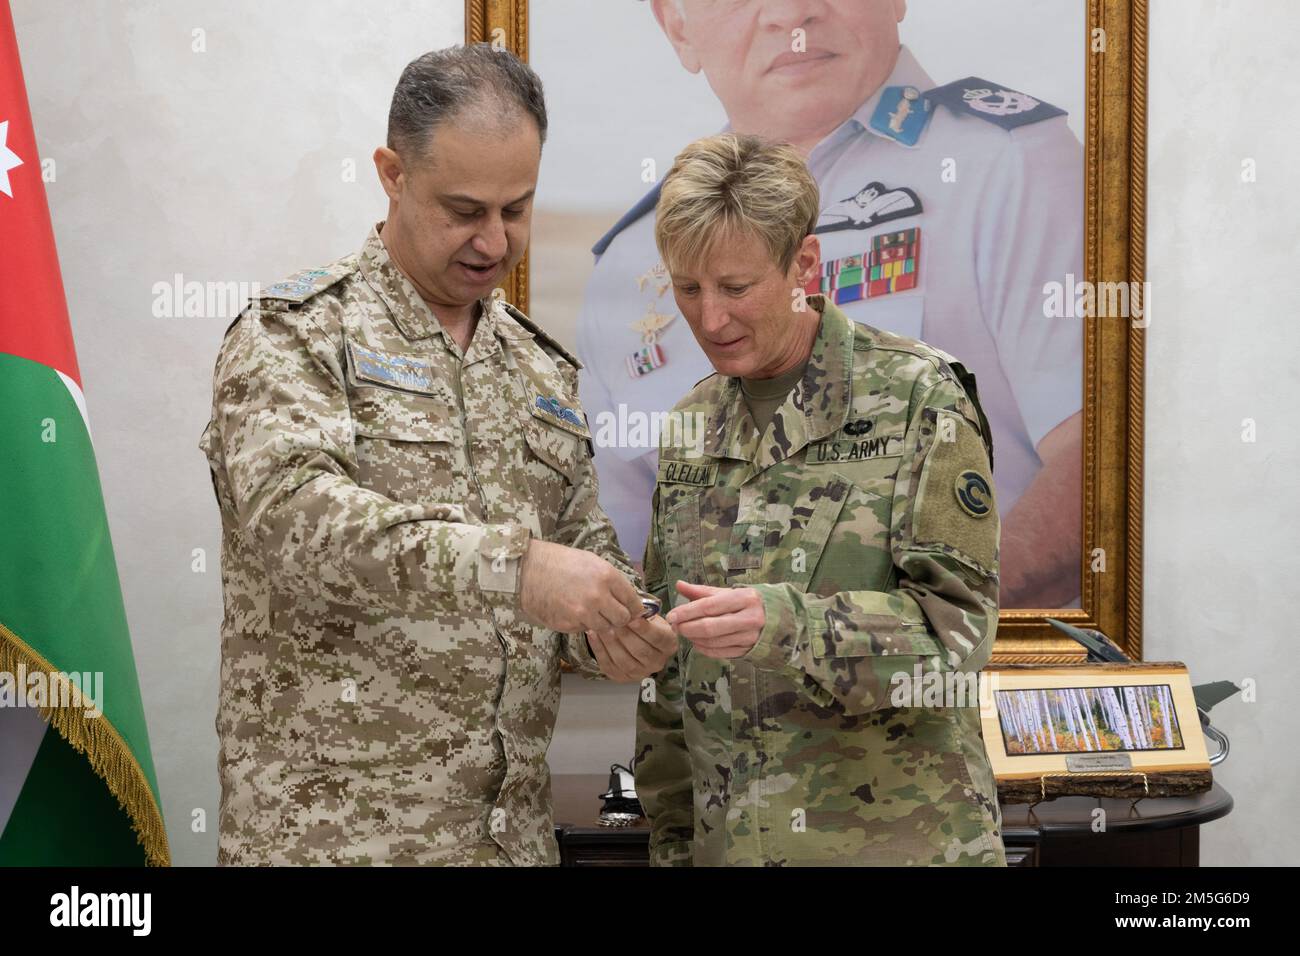 The Adjutant General of Colorado, U.S Army Brig. Gen. Laura Clellan tours with Brig. Gen. Mohammad Hiyasat, commander, Royal Jordanian Air Force and senior leaders for the CONG and RJAF, Mar. 16, 2022 in Amman, Jordan. Colorado and the Hashemite Kingdom of Jordan have shared a partnership under the National Guard Bureau’s State Partnership Program since 2004. Stock Photo